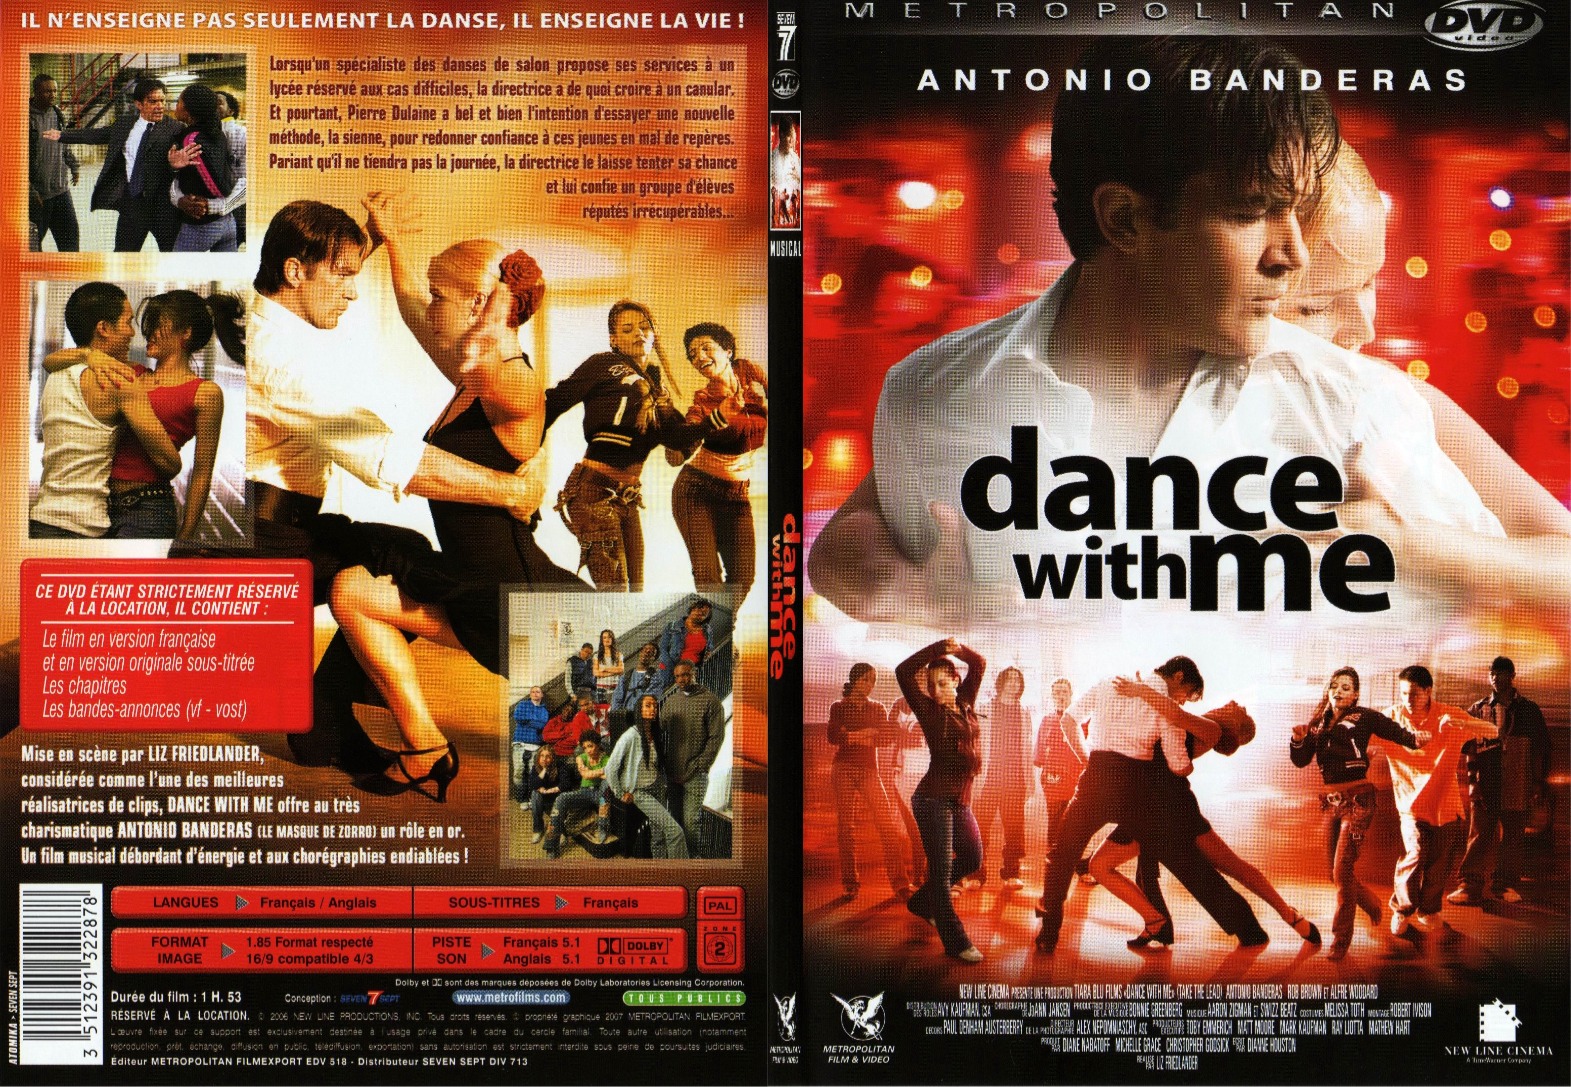 Jaquette DVD Dance with me - SLIM